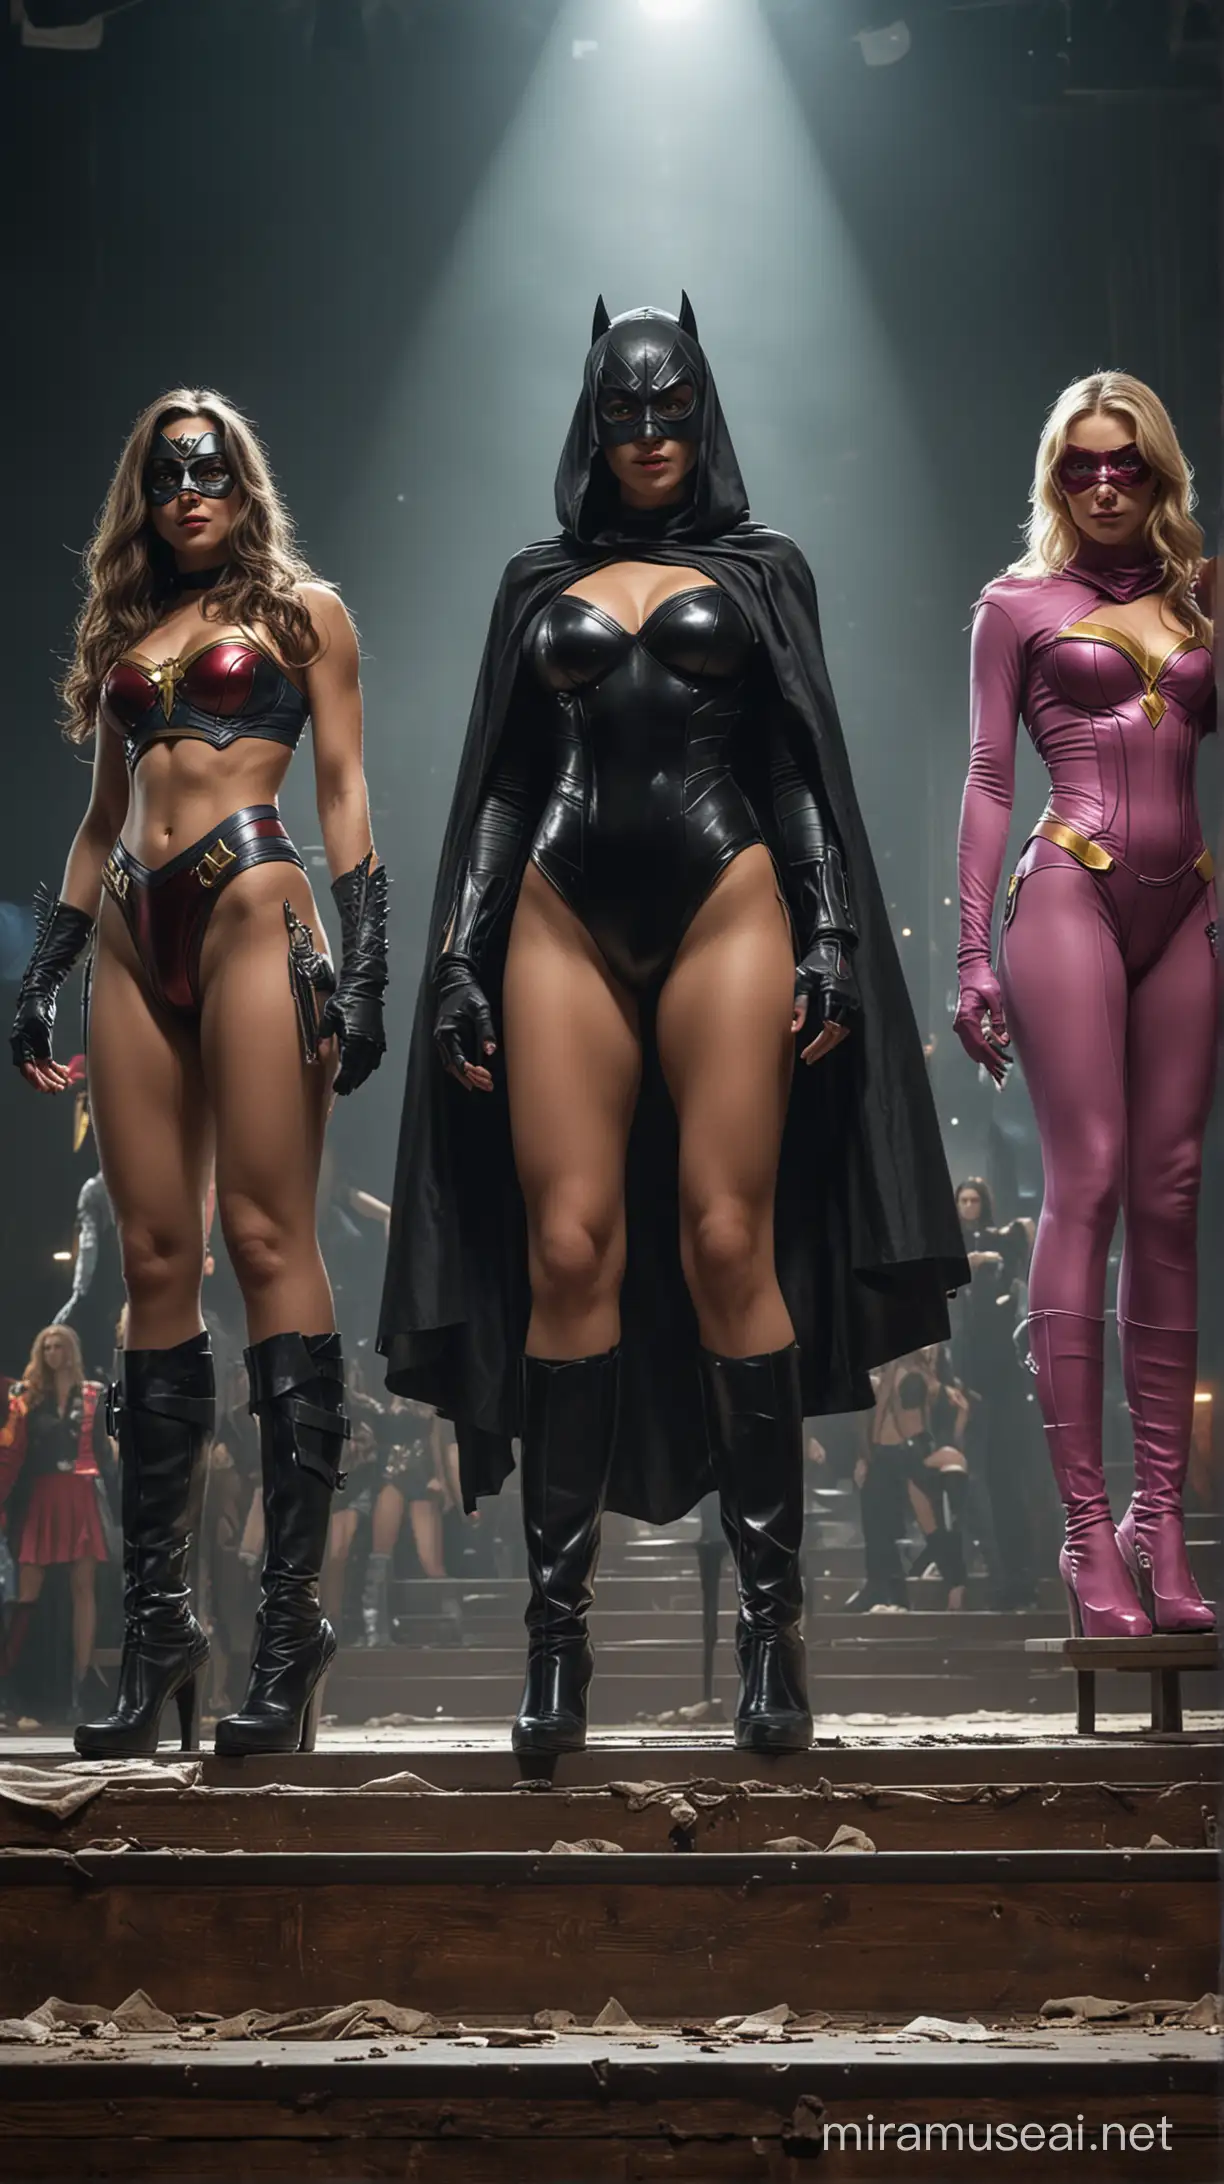 3 beautiful and sexy superheroines with colorful costumes and eye masks are standing on a raised stage in a huge auditorium. They are very distressed and helpless. Next to them on the dais is an auction podium with a muscular auctioneer who is wearing a black hood like an executioner. The stage is surrounded by nasty looking monsters and villains who are all very excited to be bidding on ownership of the captured heroines. Extreme detail. Dangerous atmosphere. Many different colored spotlights. Wide shot view. 